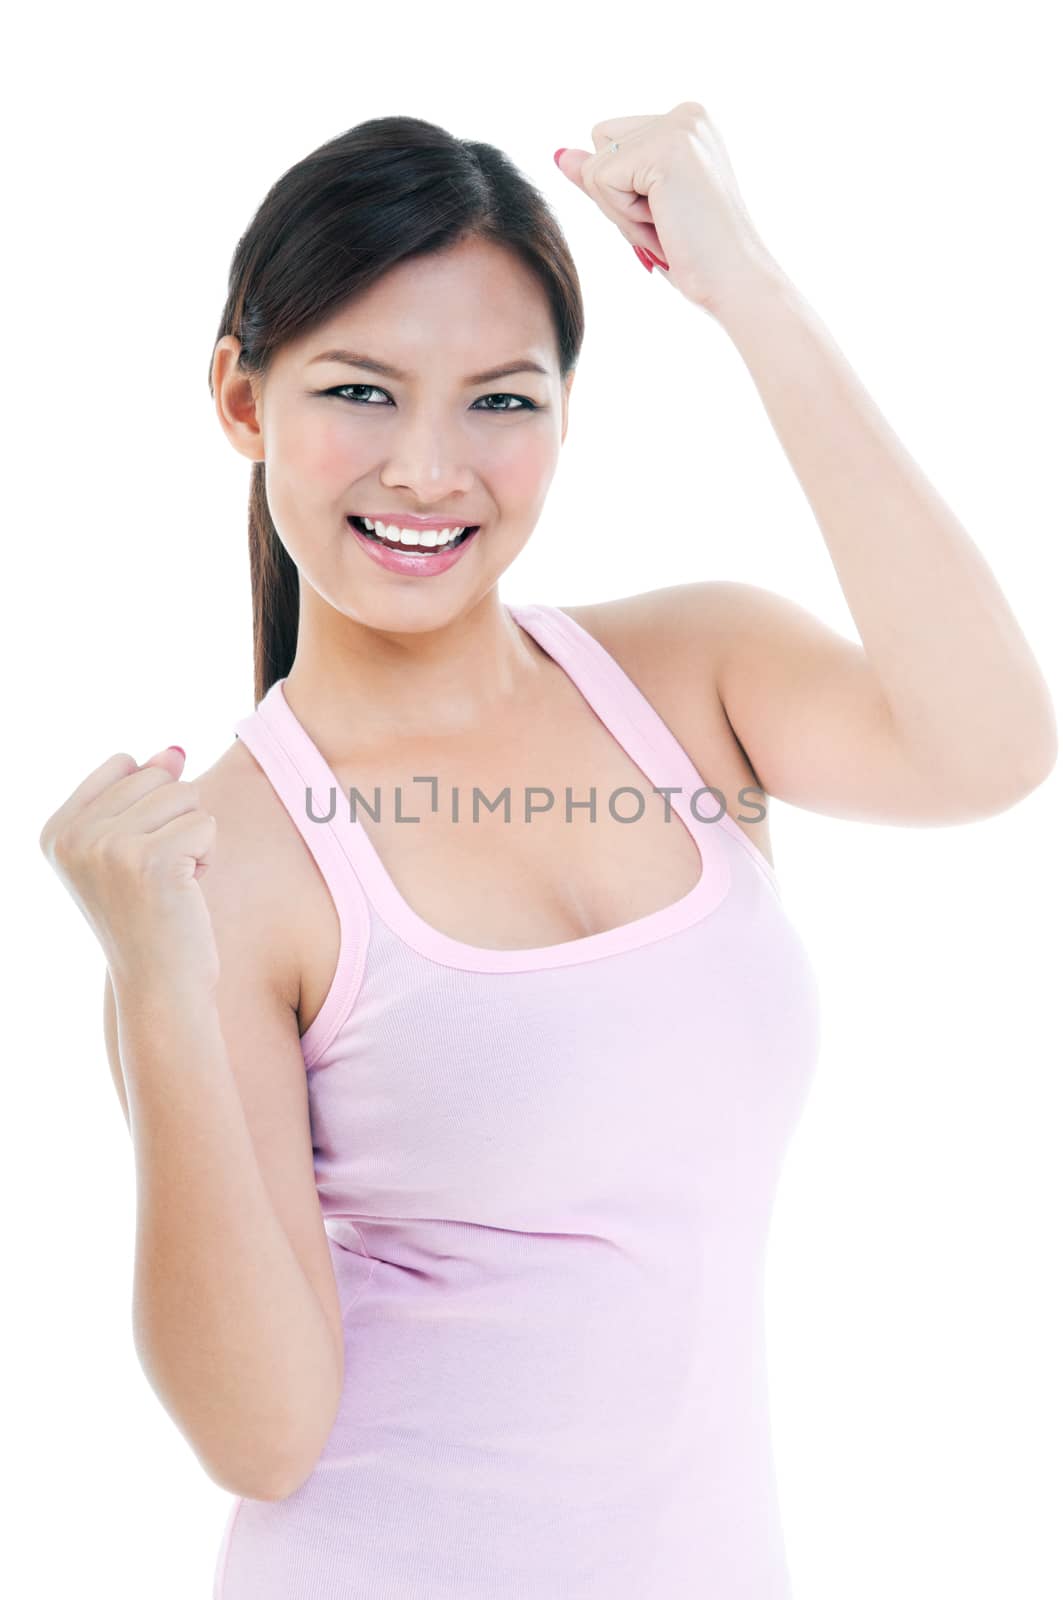 Portrait of an excited young woman celebrating success, isolated on white.